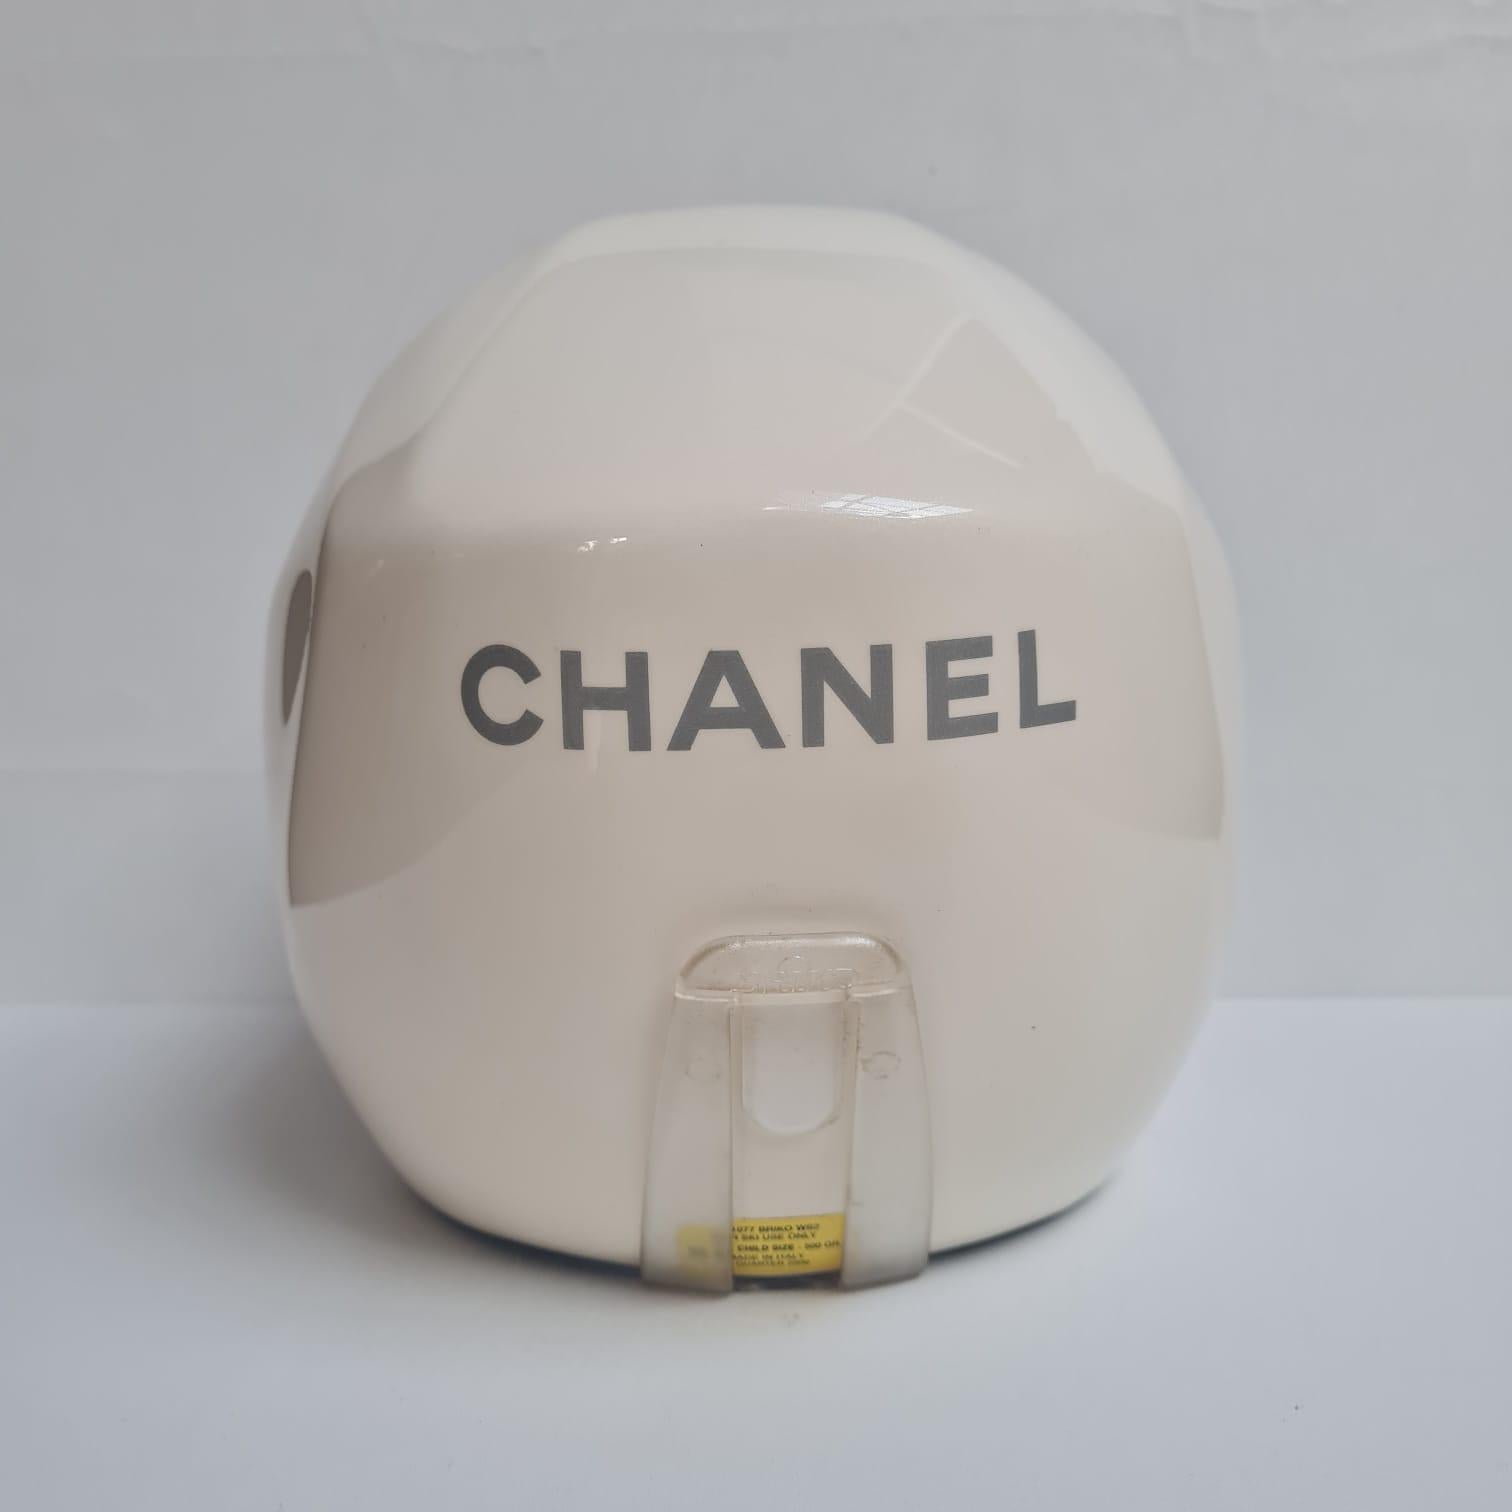 Rare ski helmet from chanel. Size 56. Overall in great condiiton, with light marks as seen on pictures. Helmet only.